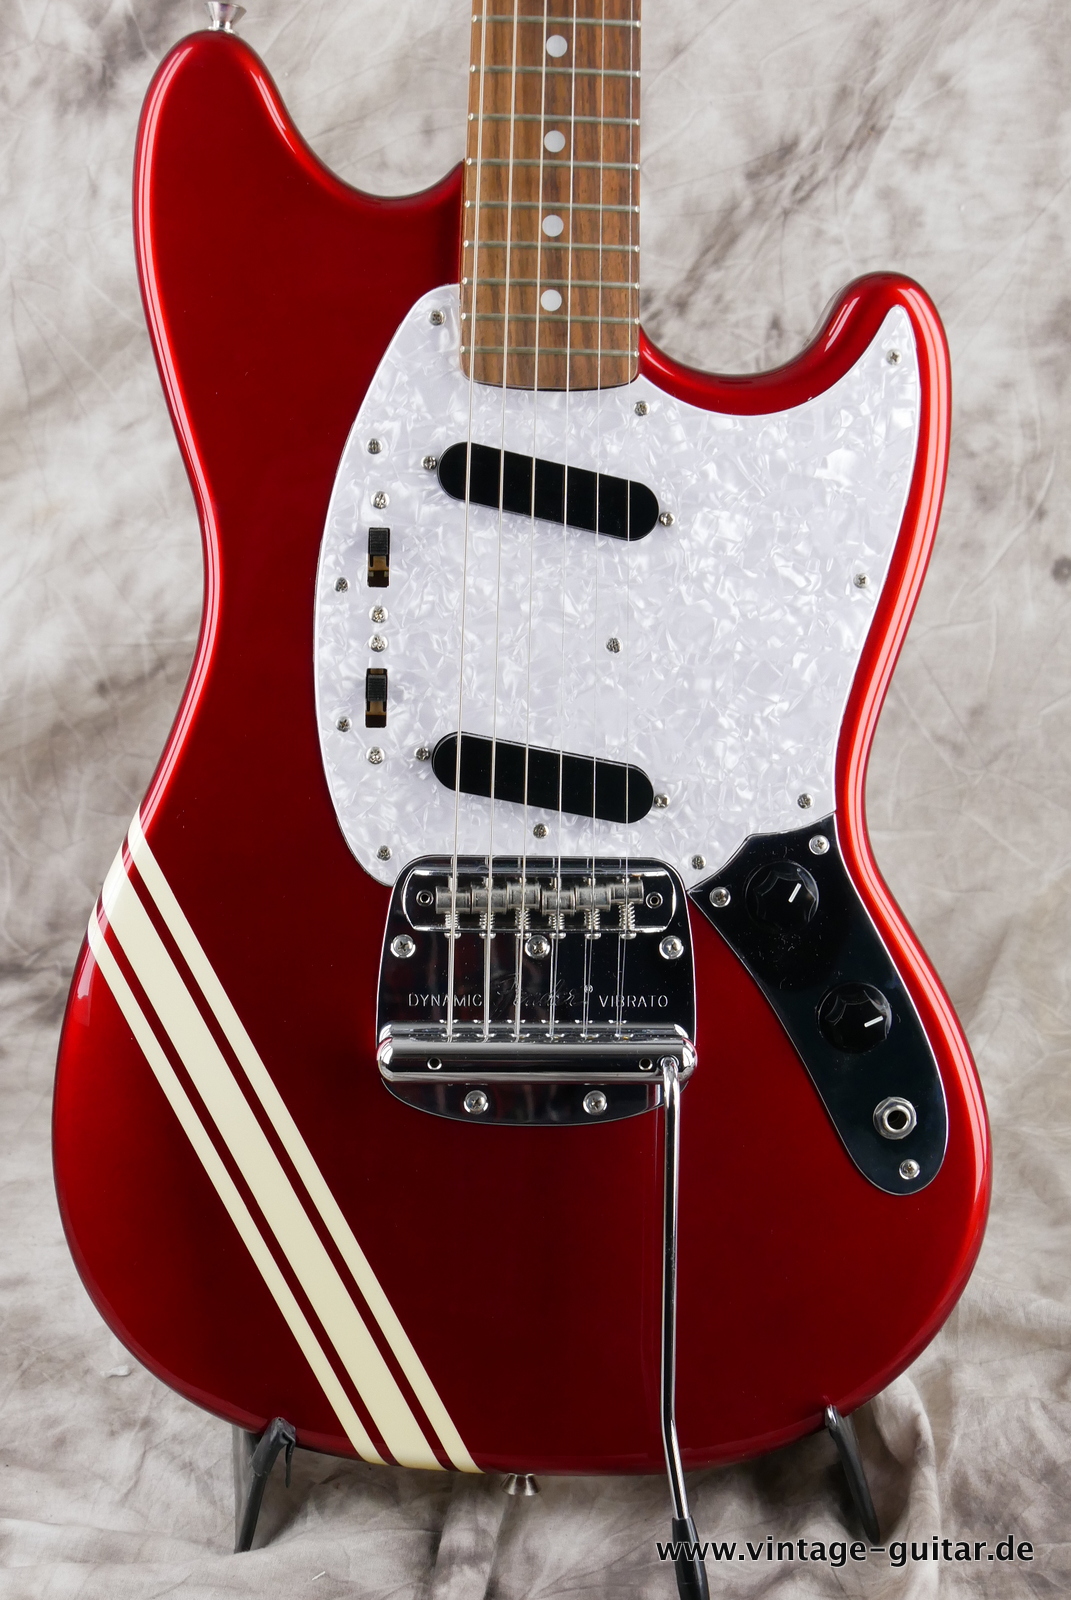 Fender_Mustang_competition_70s_RI_candy_apple_red_Japan_2002-003.JPG